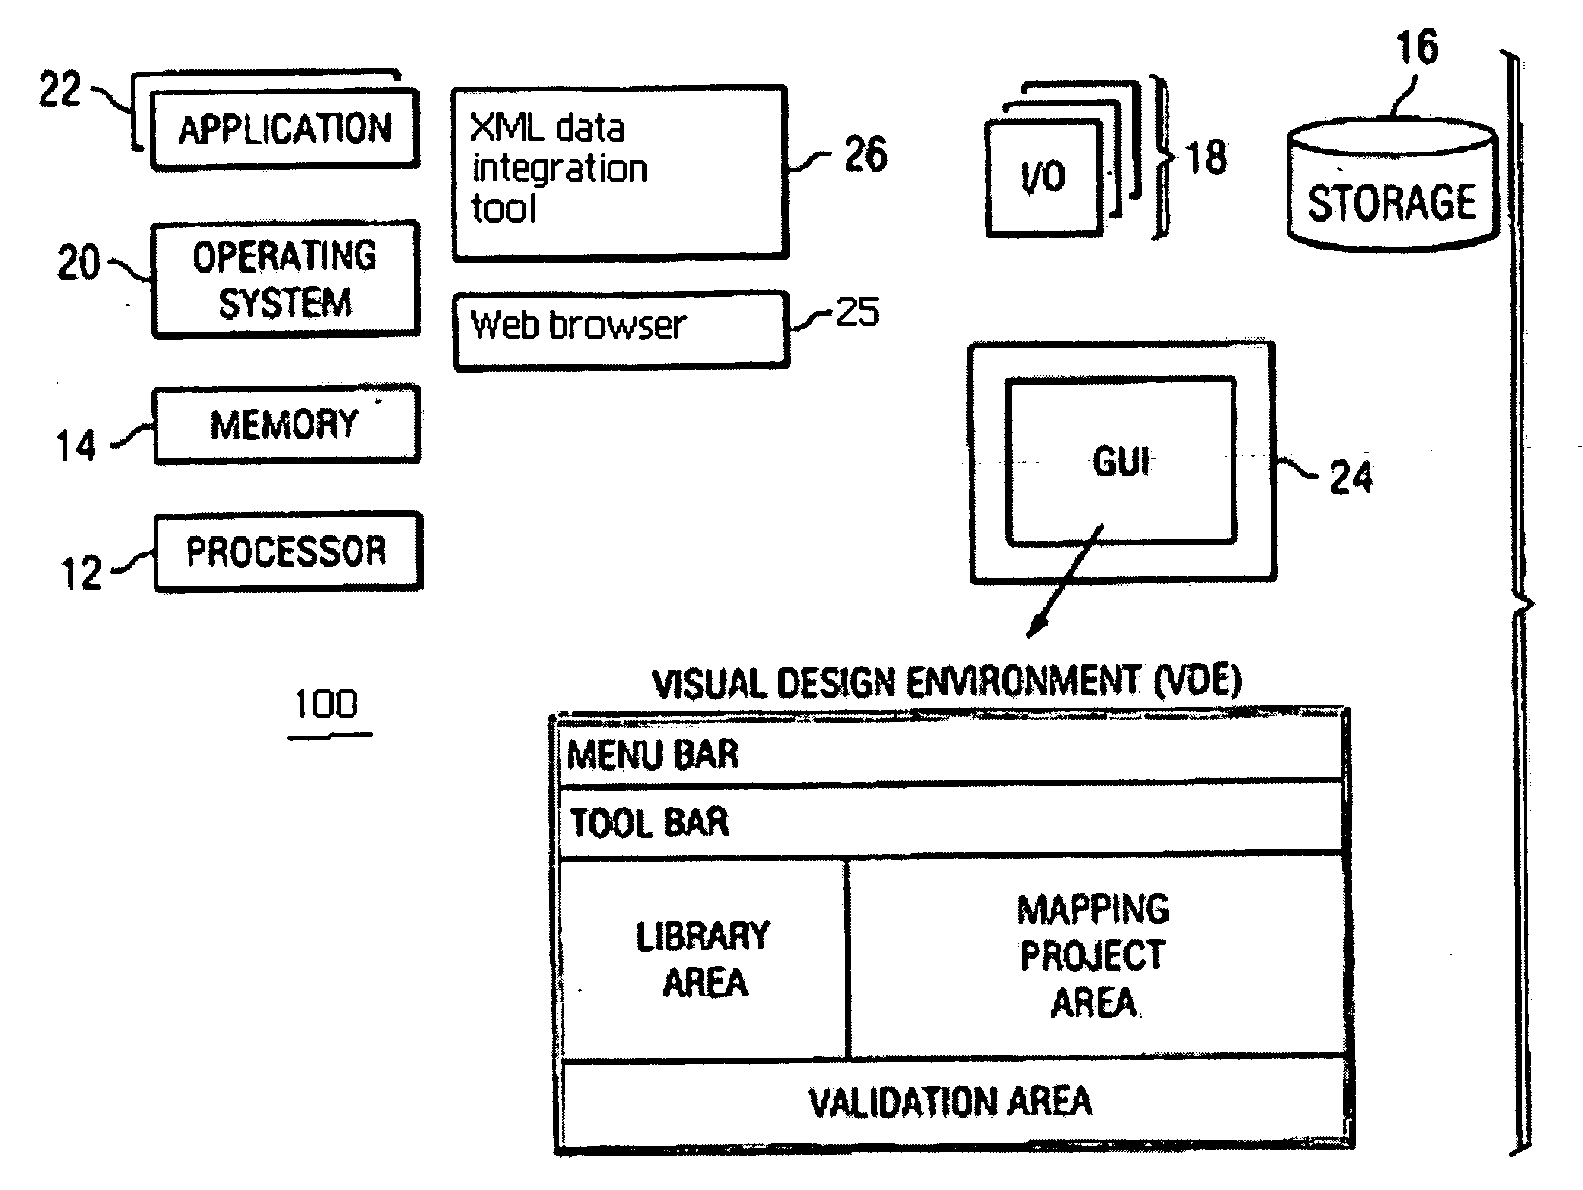 System for describing text file formats in a flexible, reusable way to facilitate text file transformations